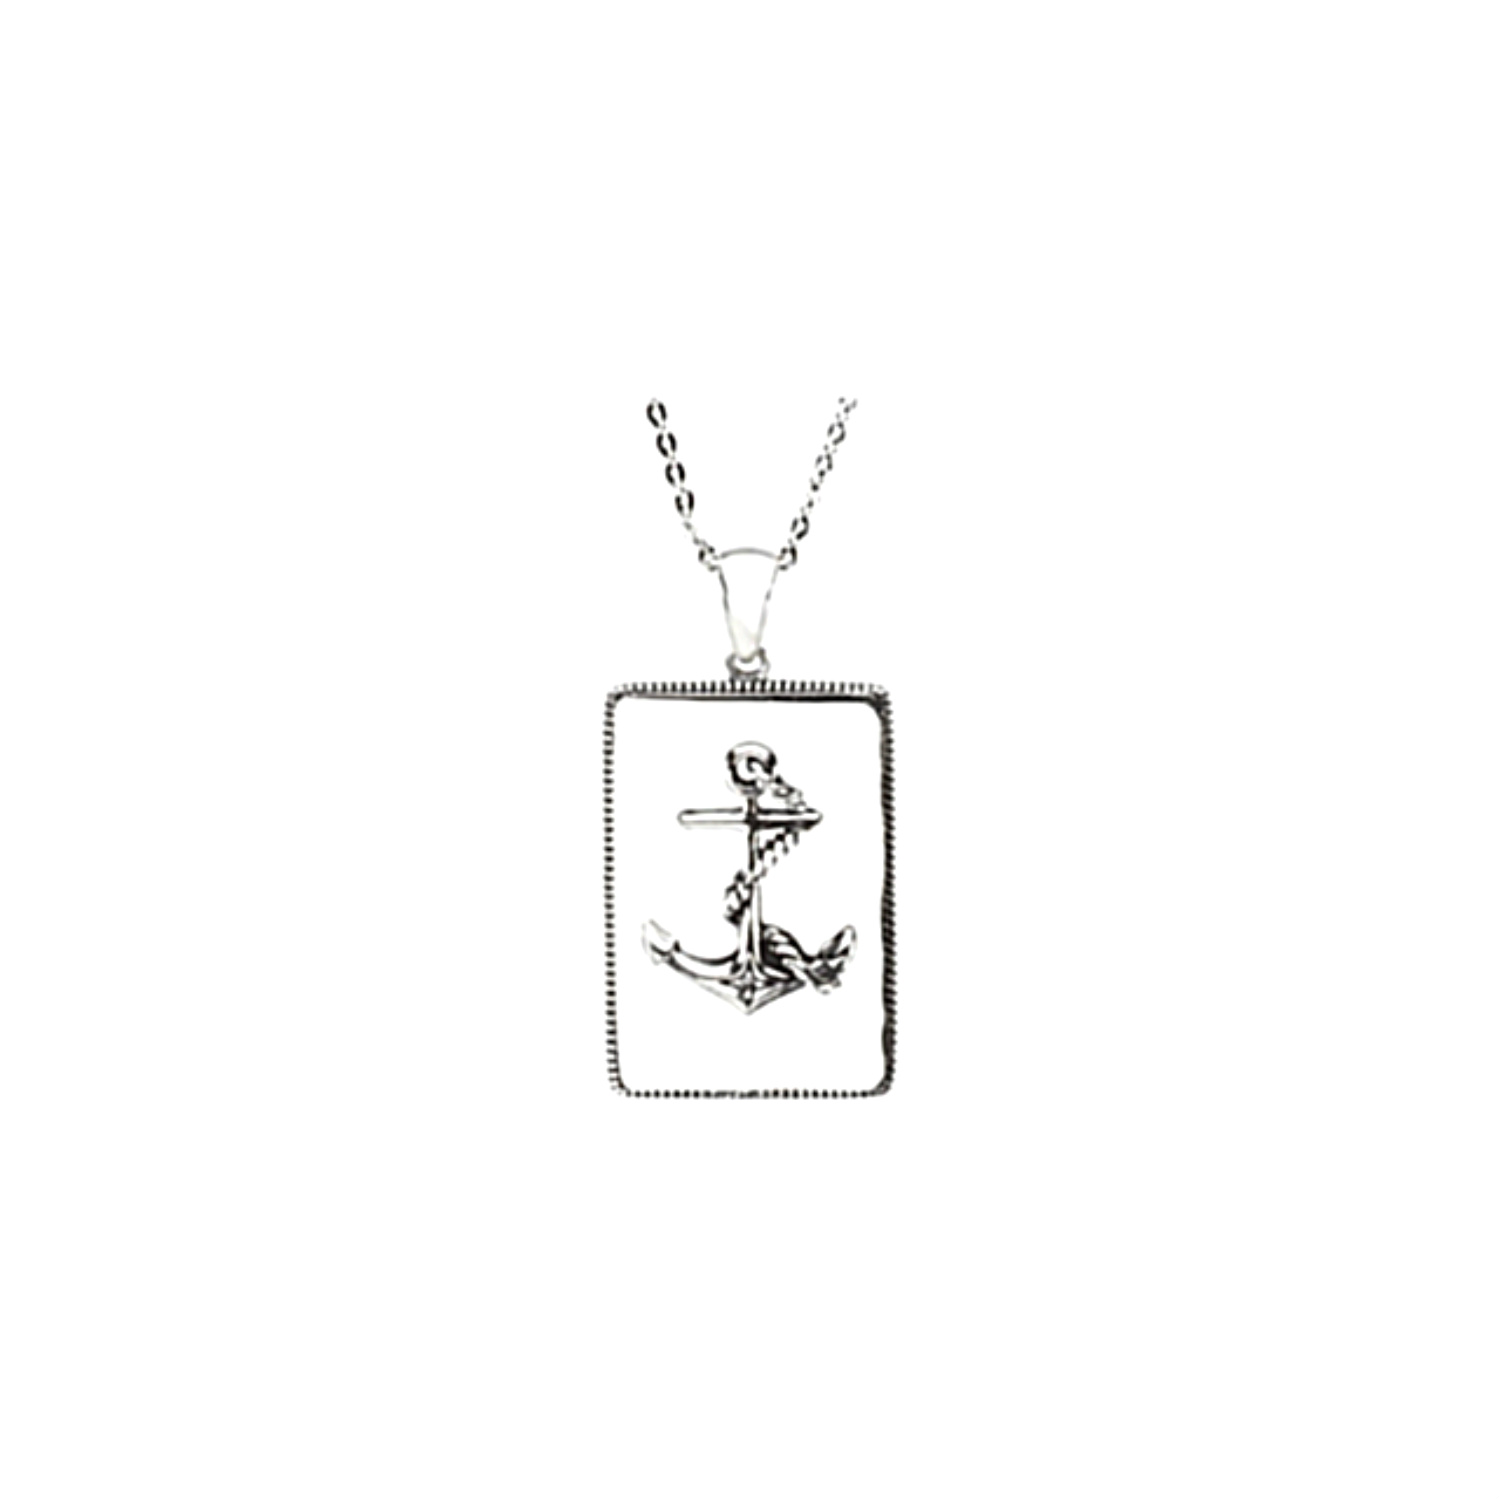 Diamond 'Cancer Courage' Rhodium Plate Sterling Silver Anchor Pendant Necklace. 